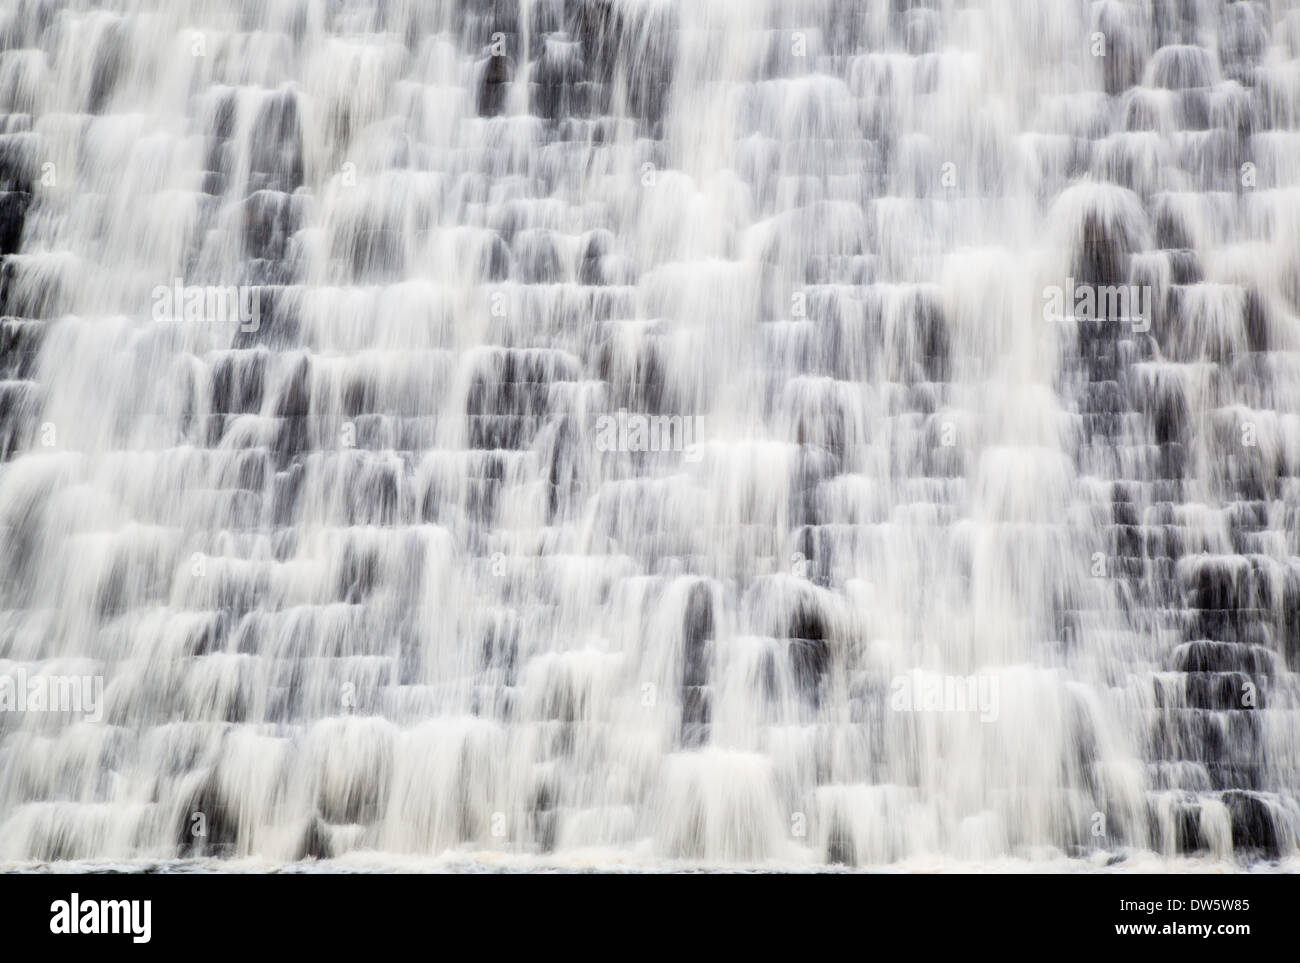 Water cascading down the dam wall at Derwent reservoir after months of heavy rain in the Derbyshire Peak District Stock Photo